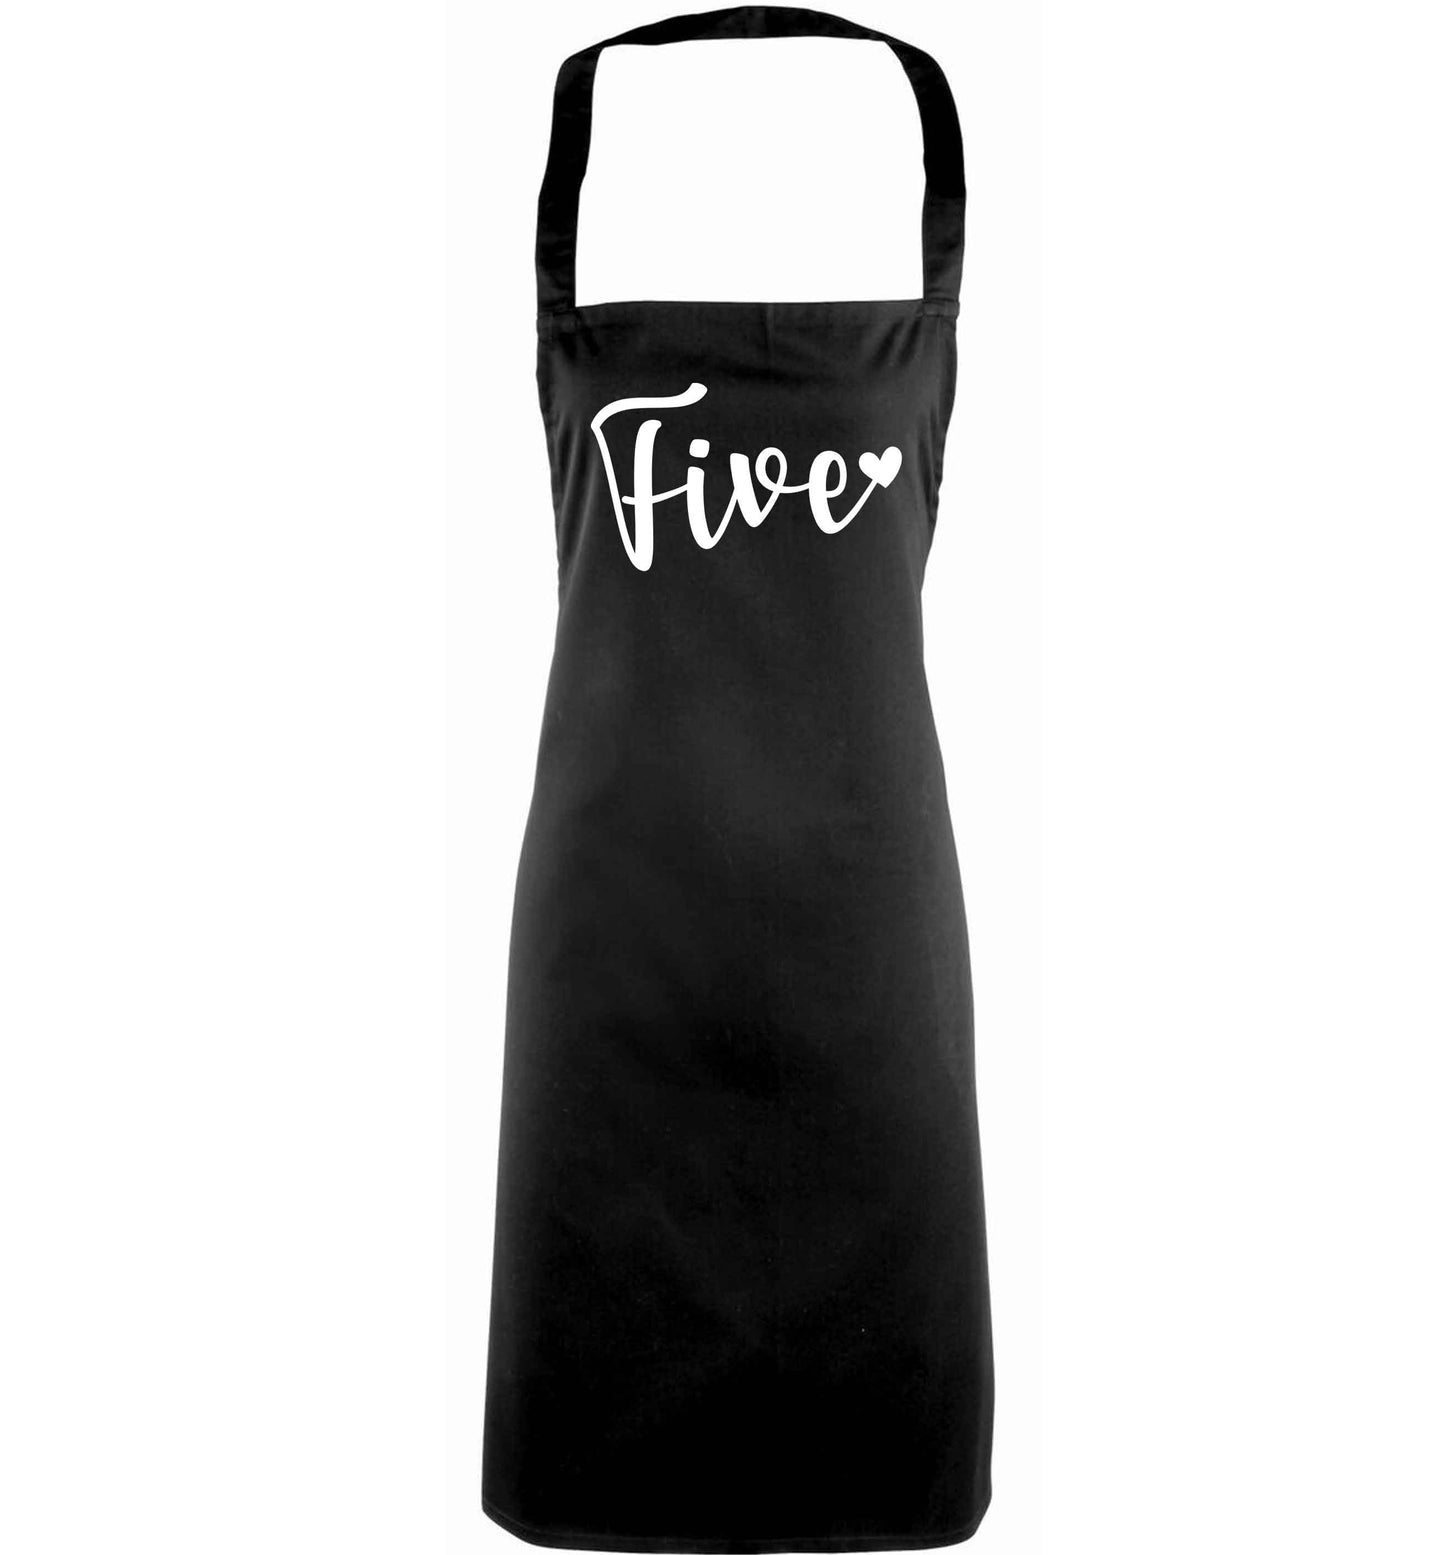 Five and heart adults black apron